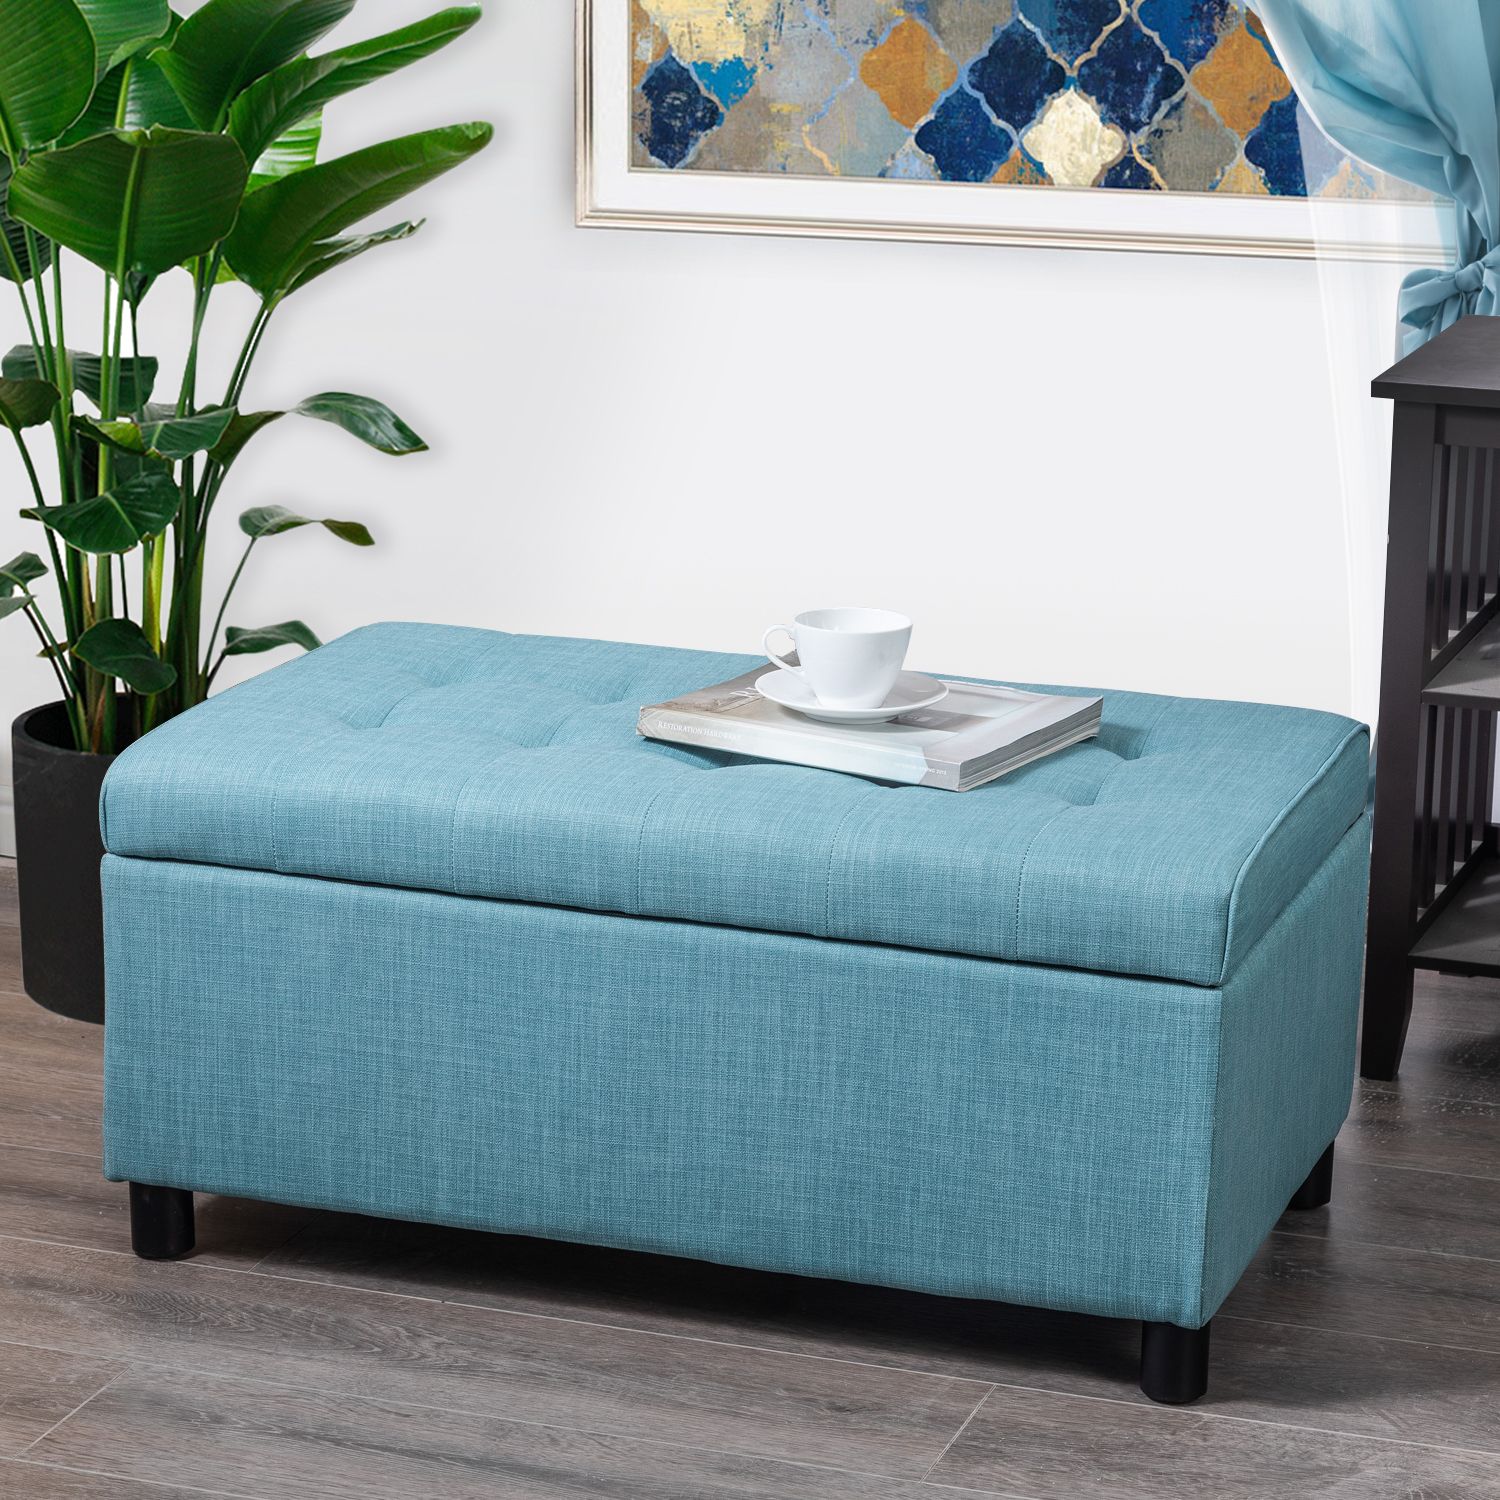 Joveco Classic Tufted Fabric Rectangular Ottoman Bench With Large Throughout Fabric Storage Ottomans (View 2 of 20)